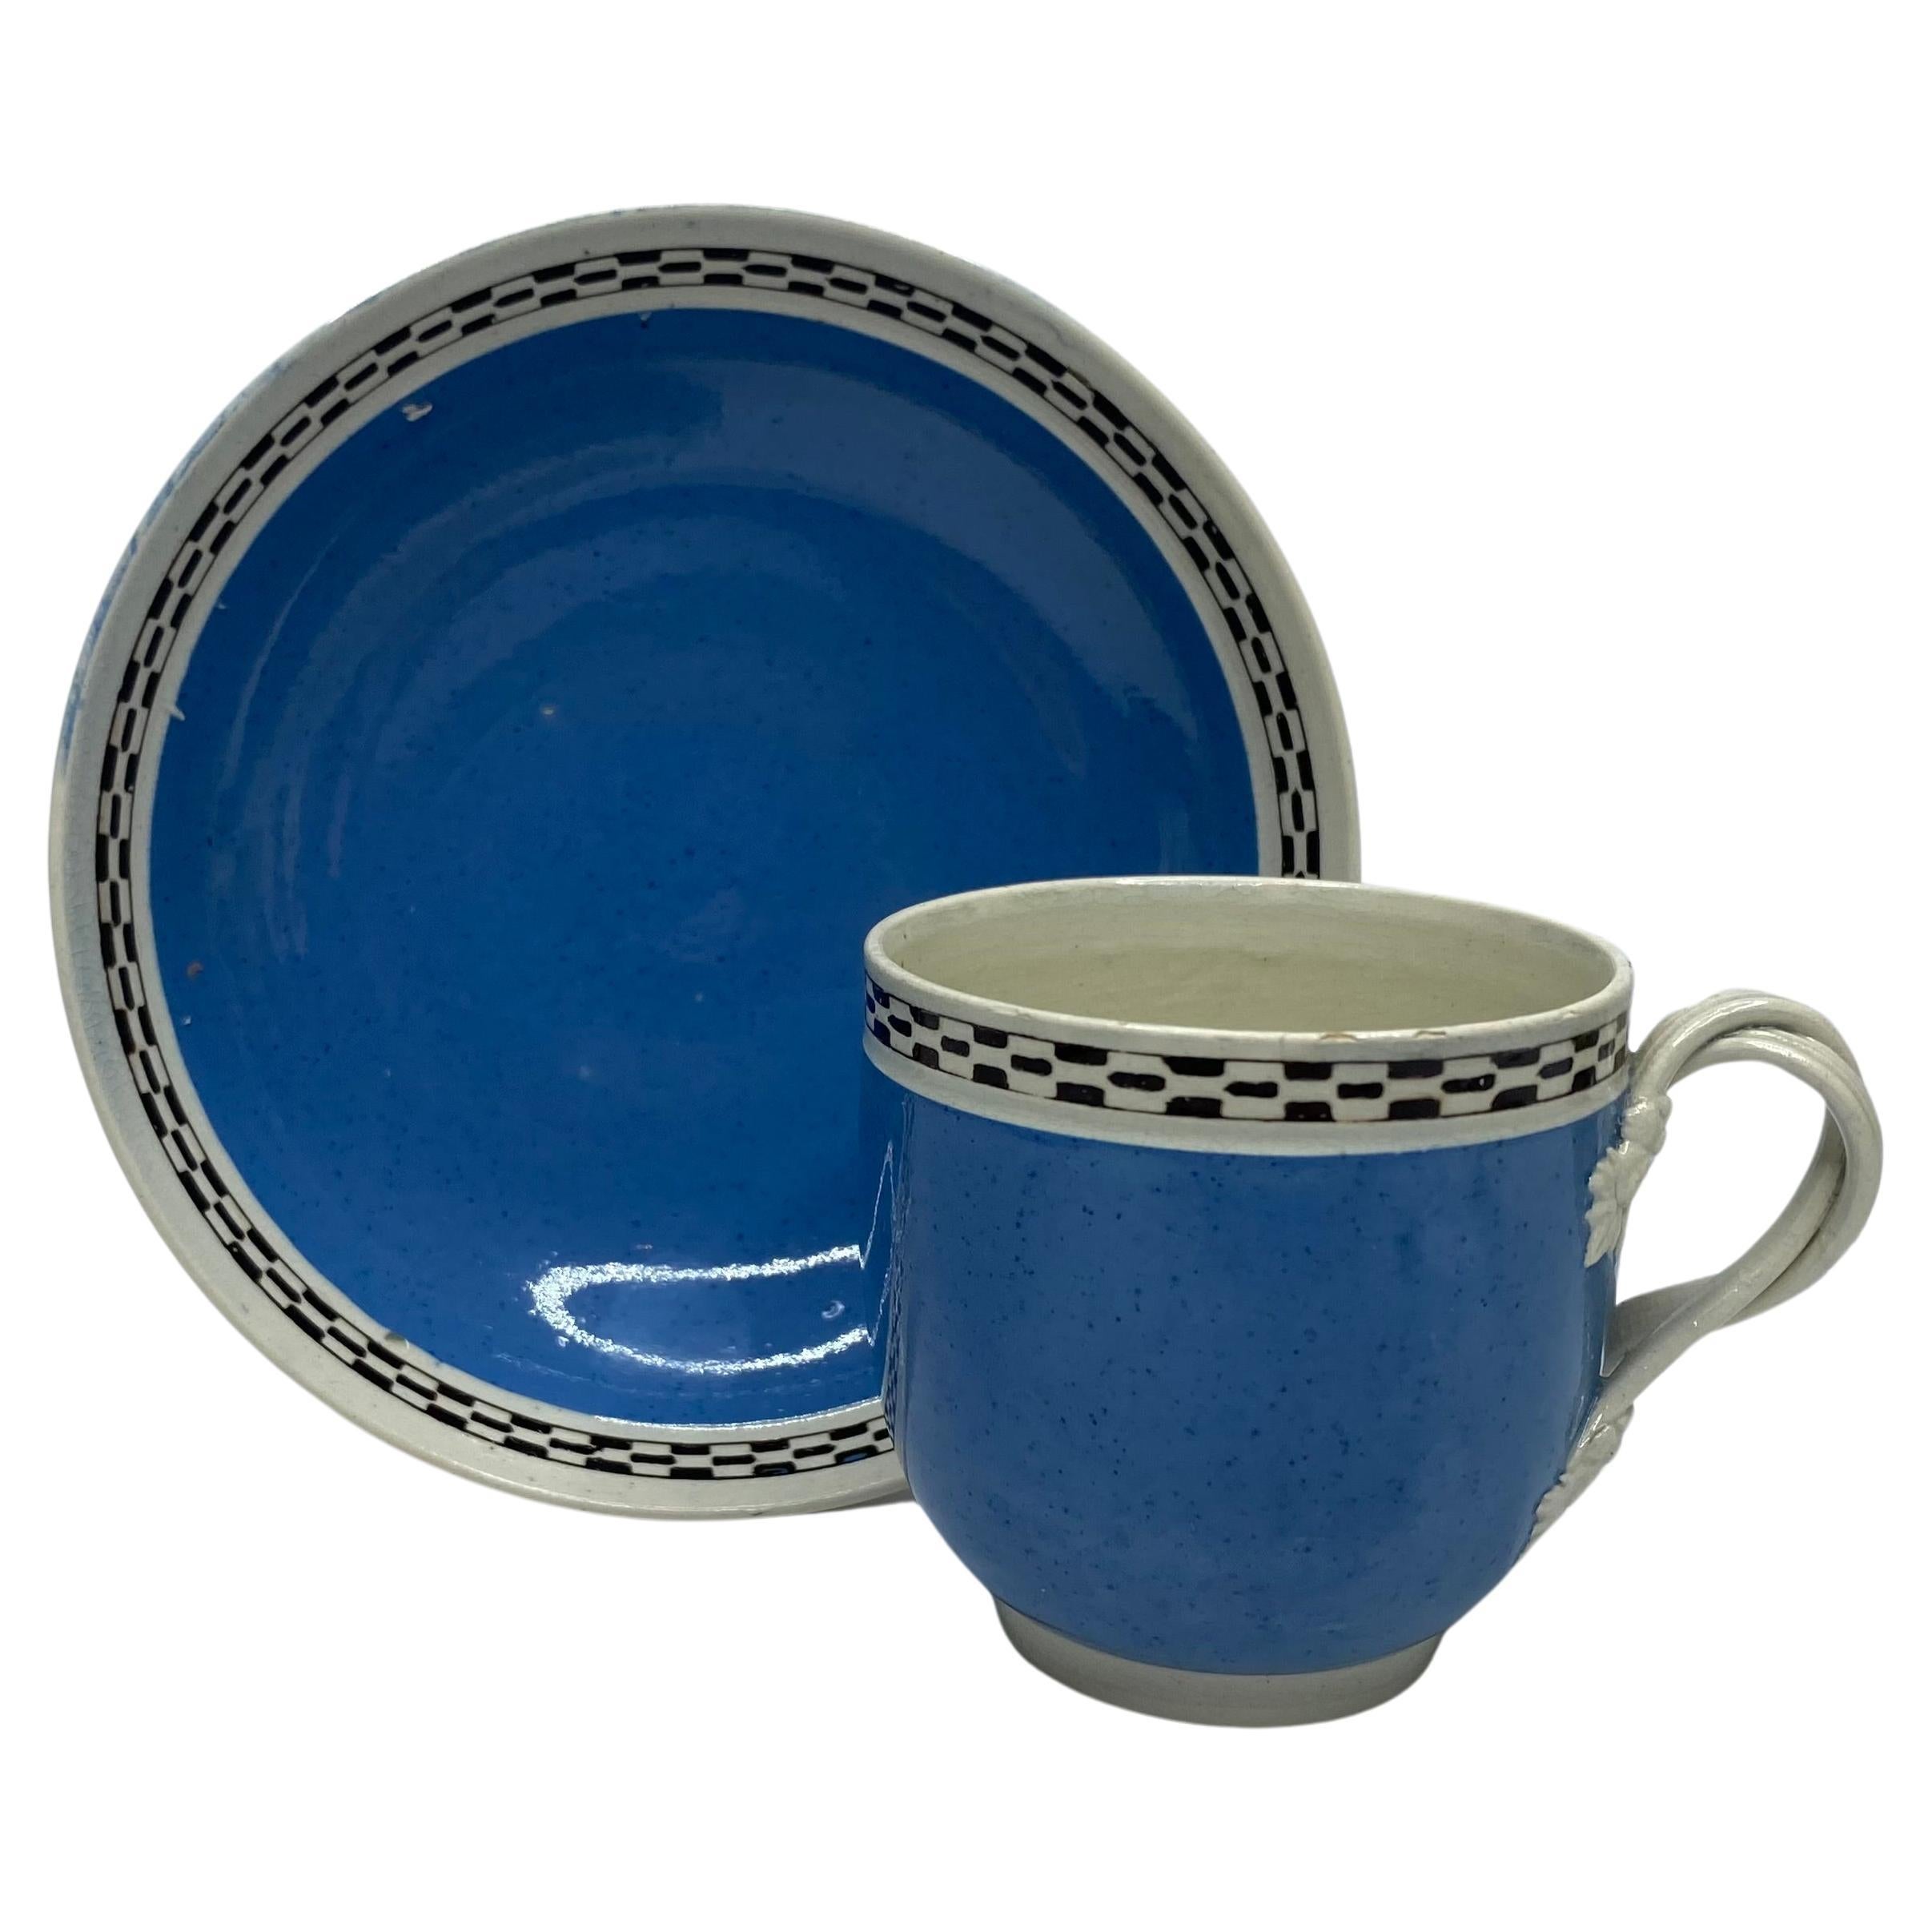 Leeds Pottery banded cup and saucer, c. 1790. For Sale